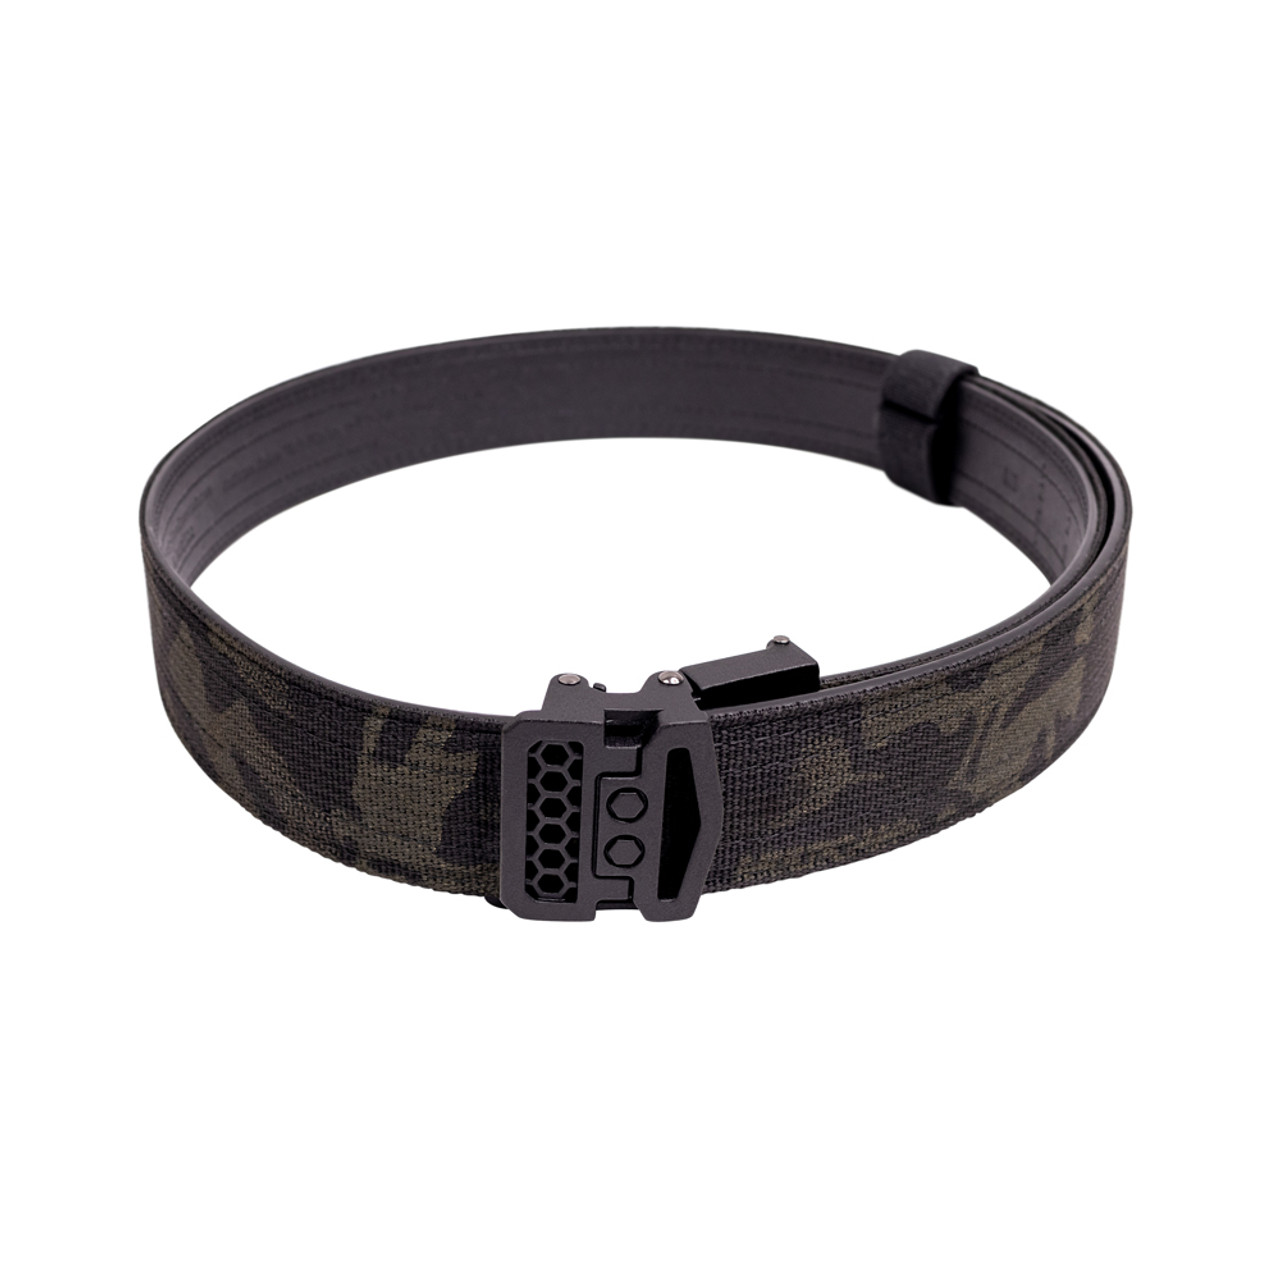 Perfect Fit Buckle Free Leather Duty Belt